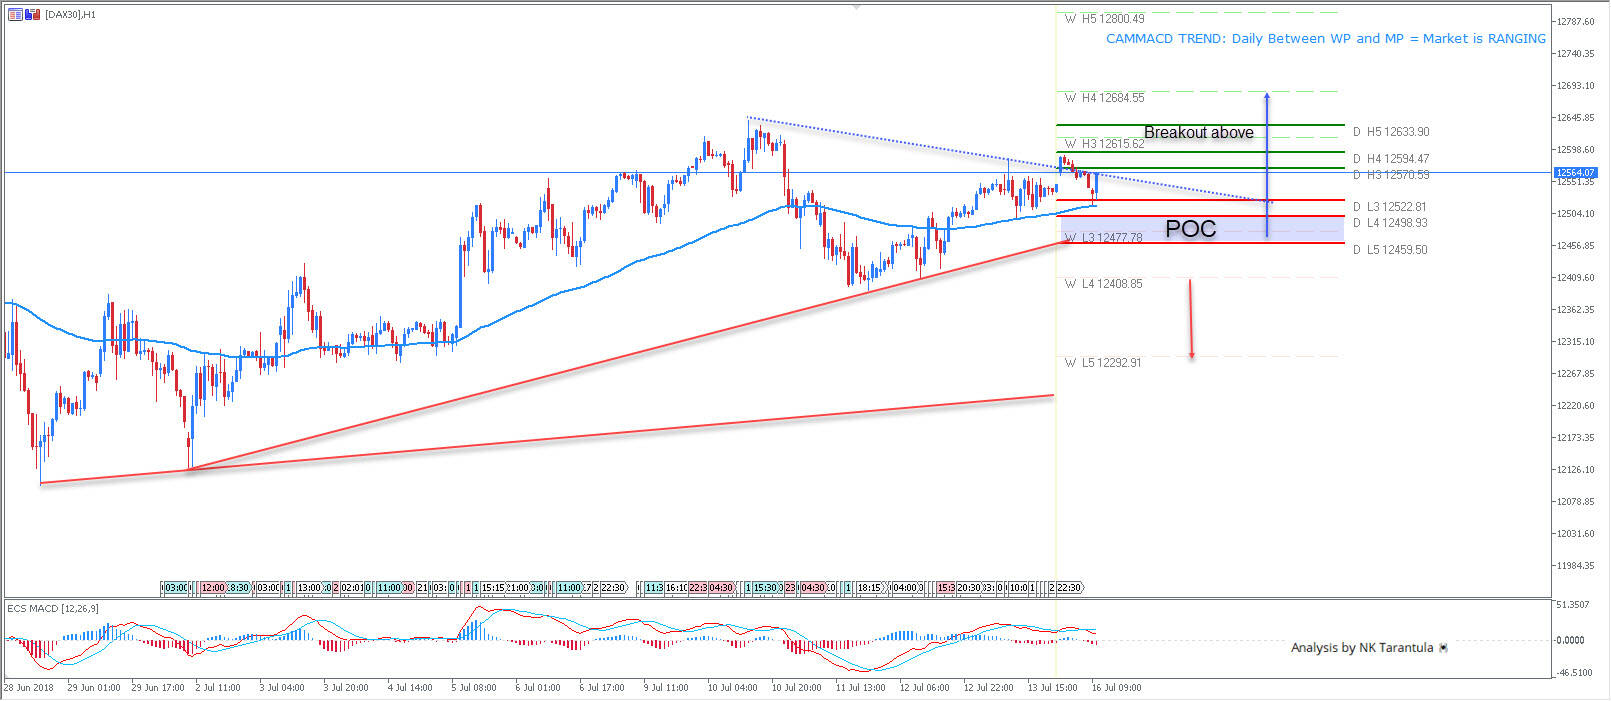 DAX30 Breakout or Retracement to the POC Zone